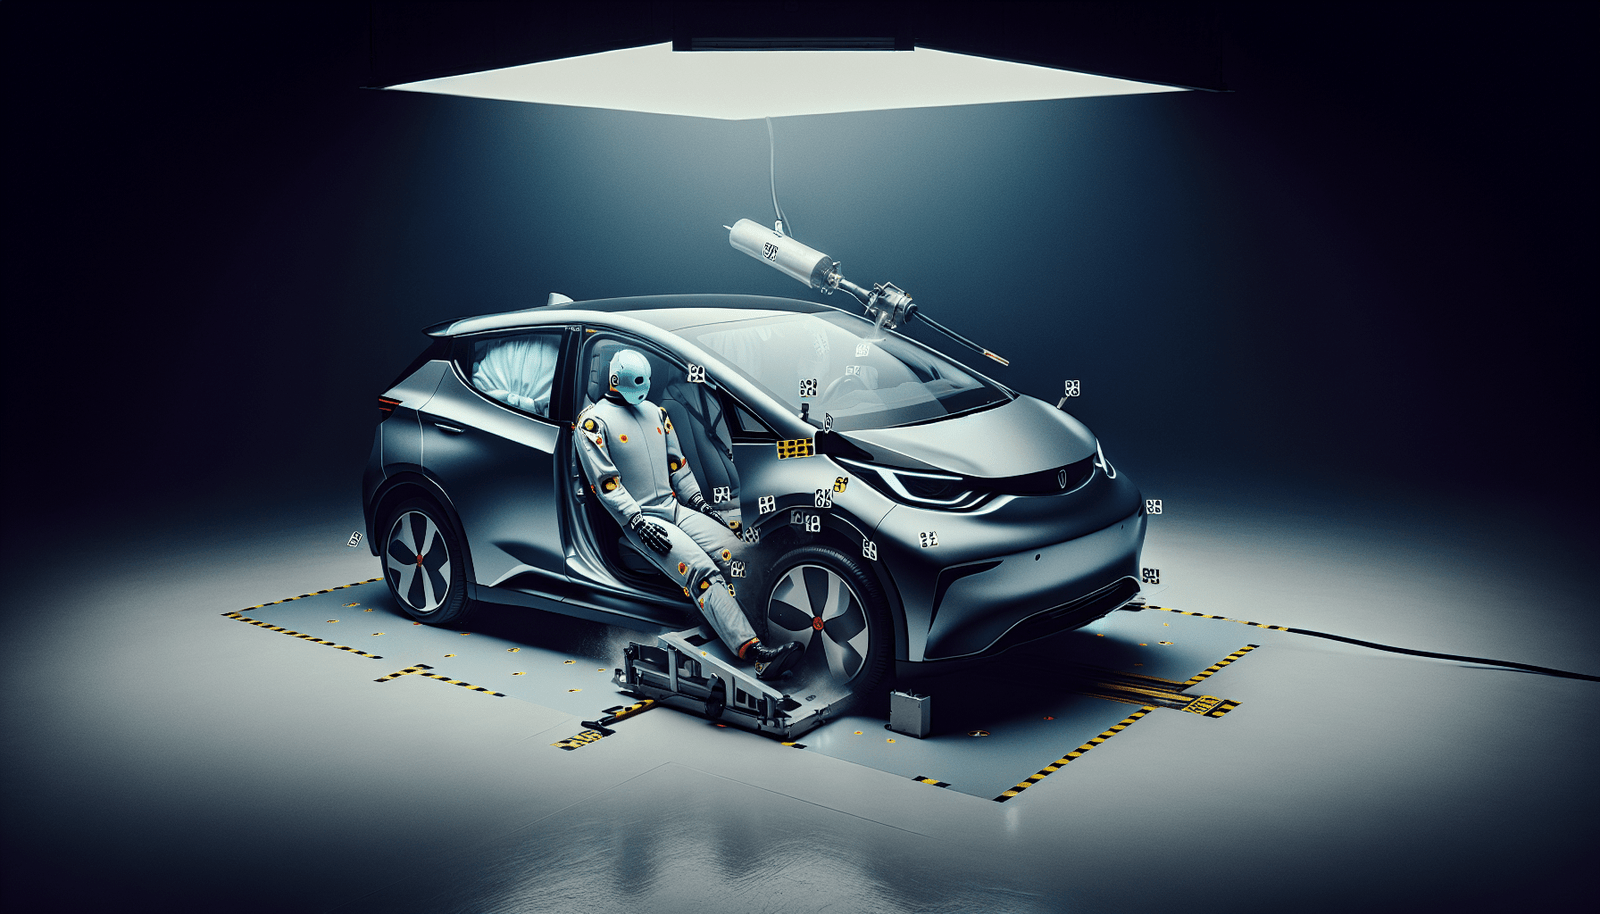 How Do Electric Vehicles Compare In Terms Of Safety Features And Crash Test Ratings?